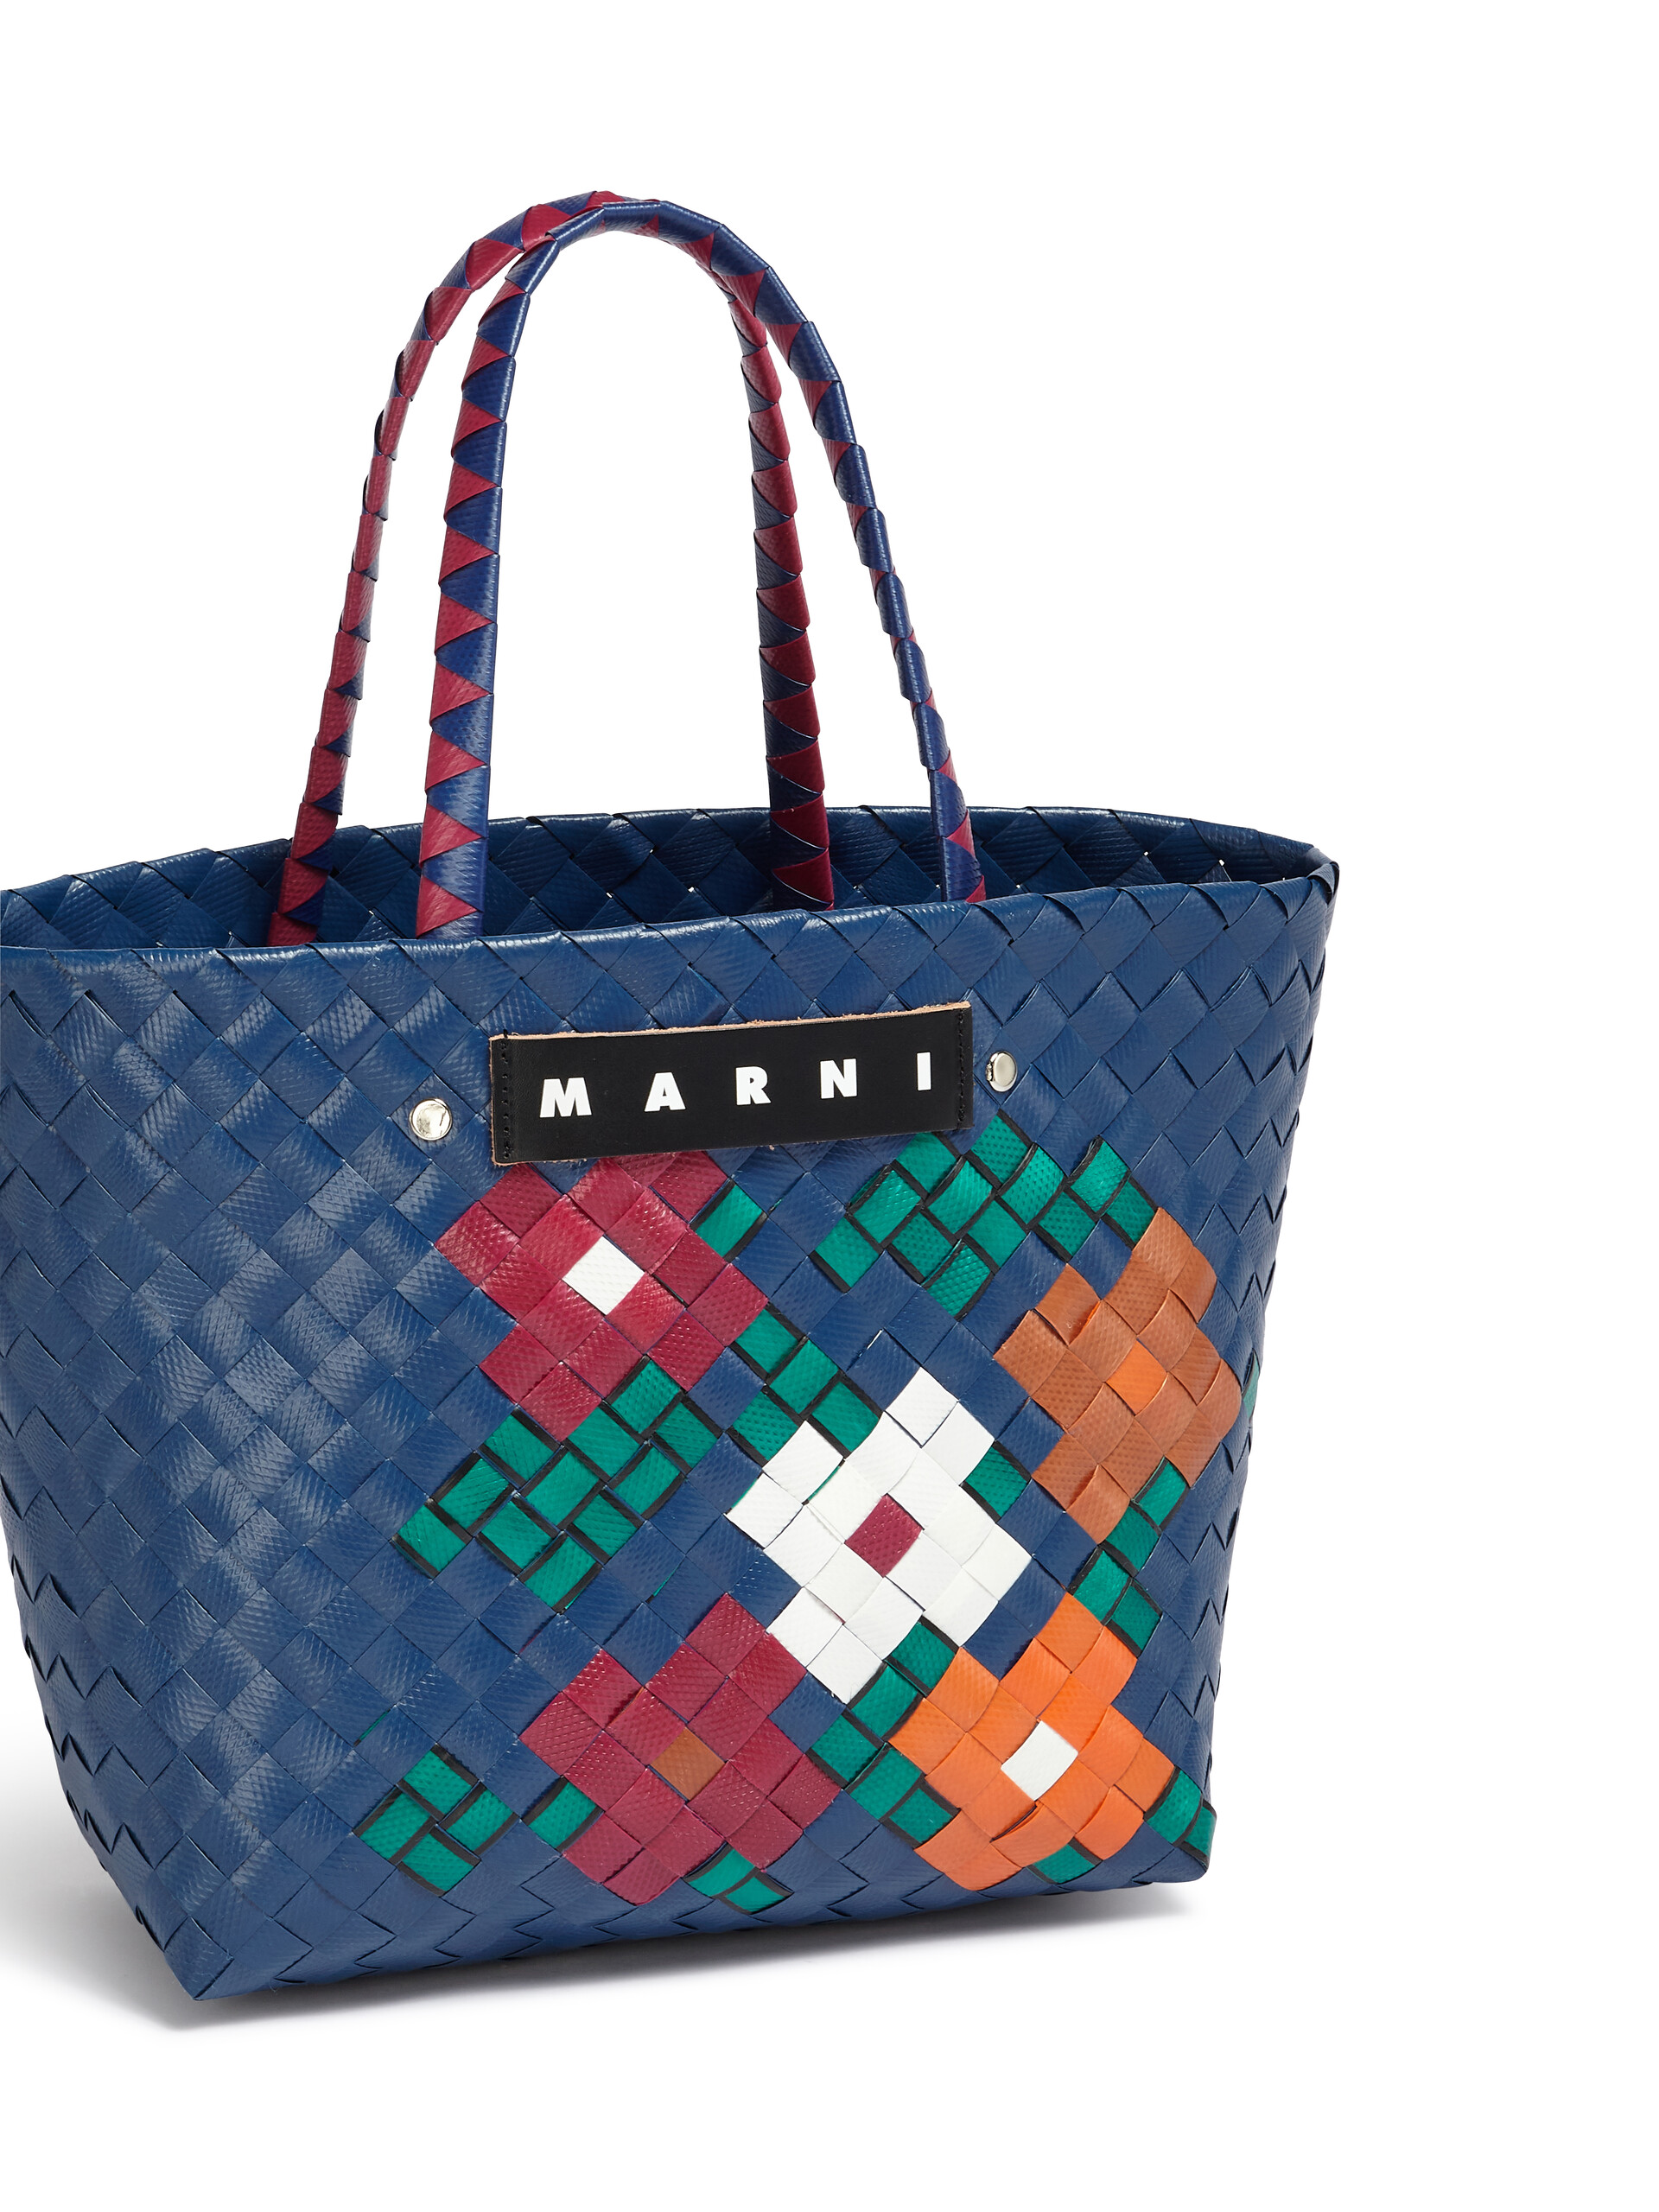 MARNI MARKET small bag in blue flower motif - Bags - Image 4